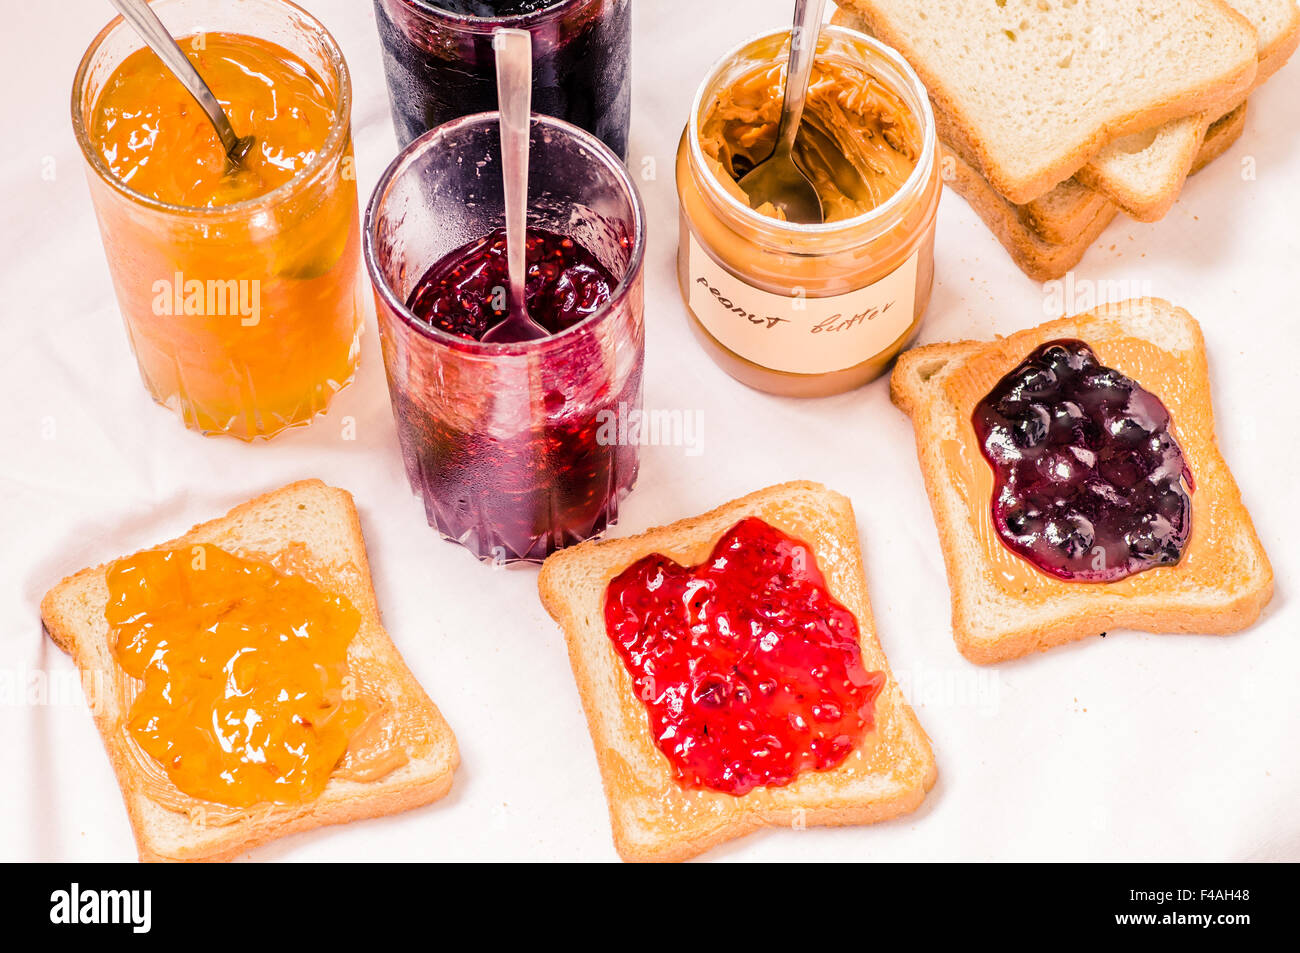 Toast sandwiches with peanut butter and jam raspberry, blueberries, orange top view Stock Photo